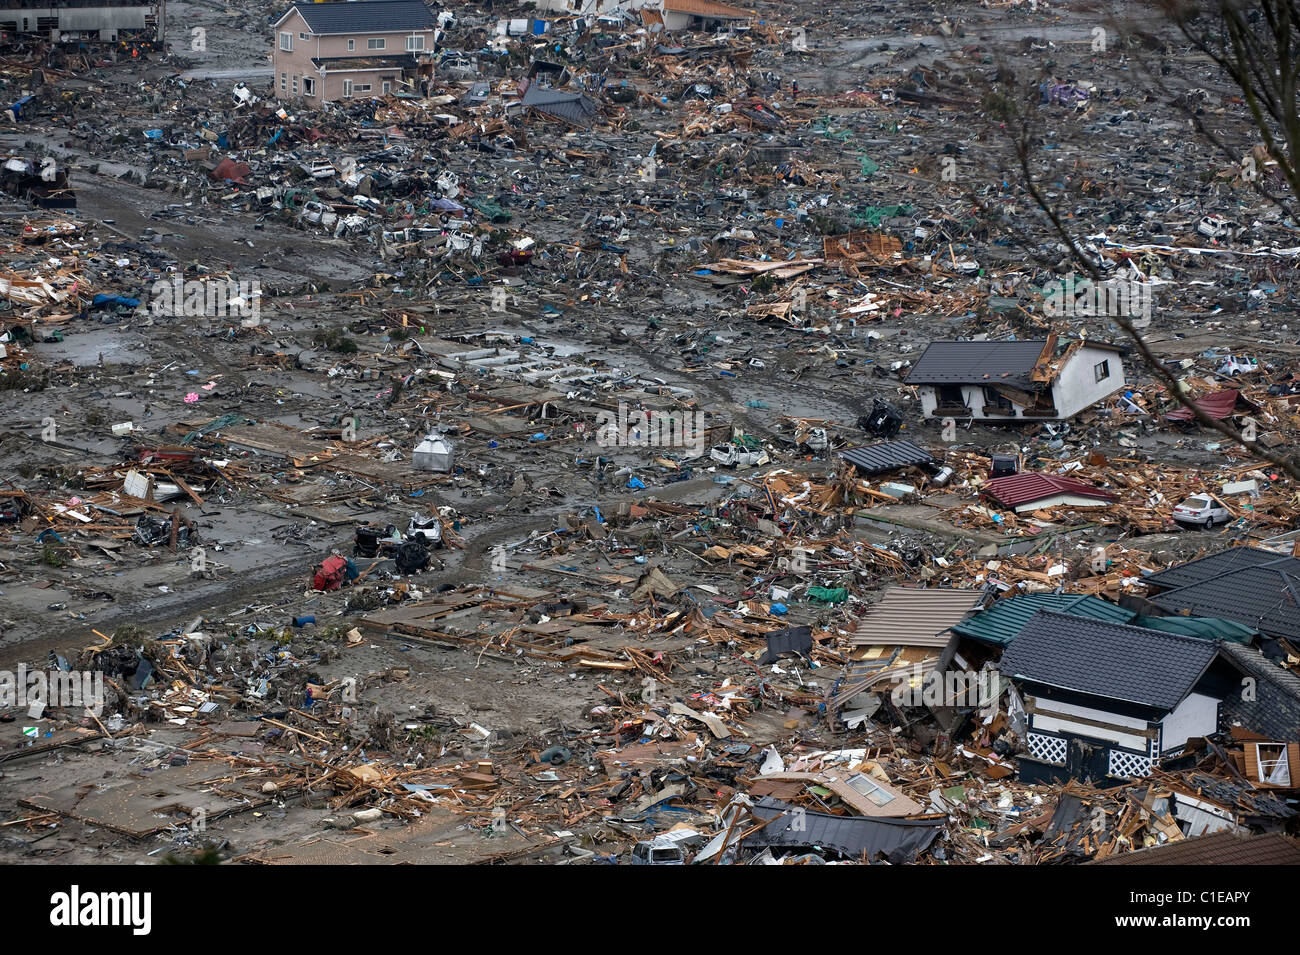 Photo shows the wasteland that was once a thriving coastal community in Ishinomaki, Japan on 15 March, 2011. Stock Photo